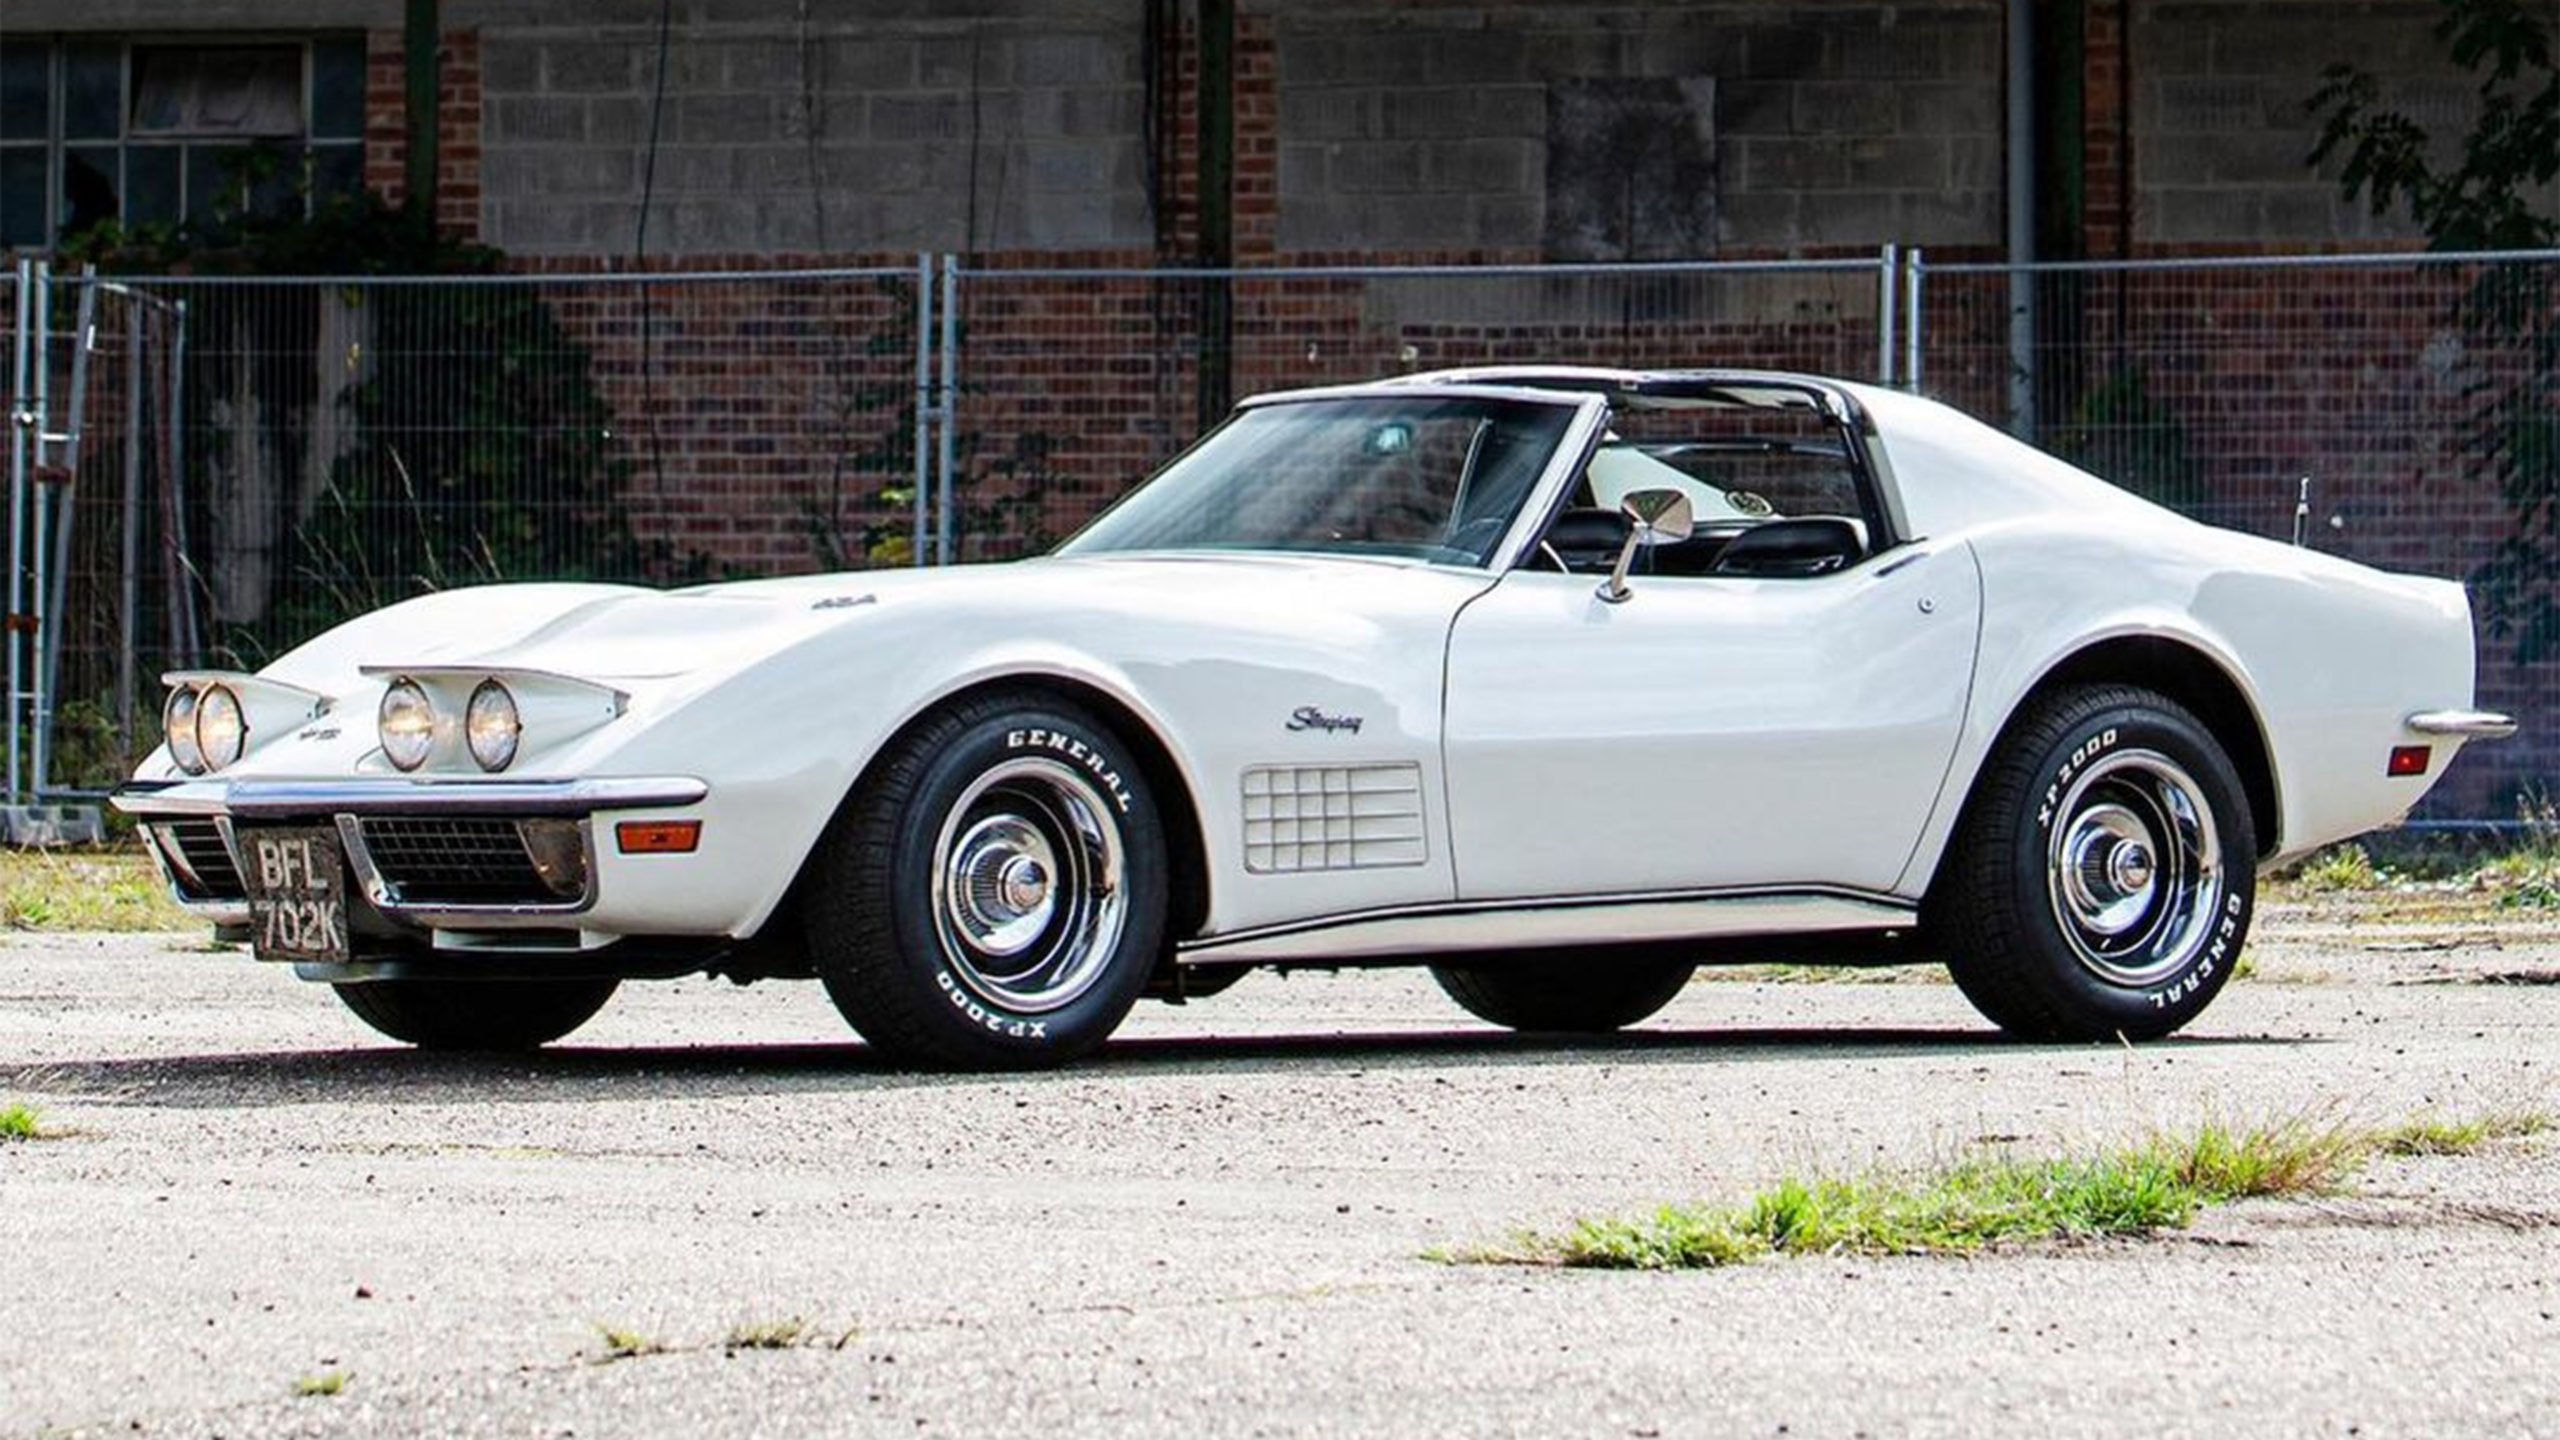 The 1970 Chevrolet Corvette ZR2: A High-Performance Icon of the 70s